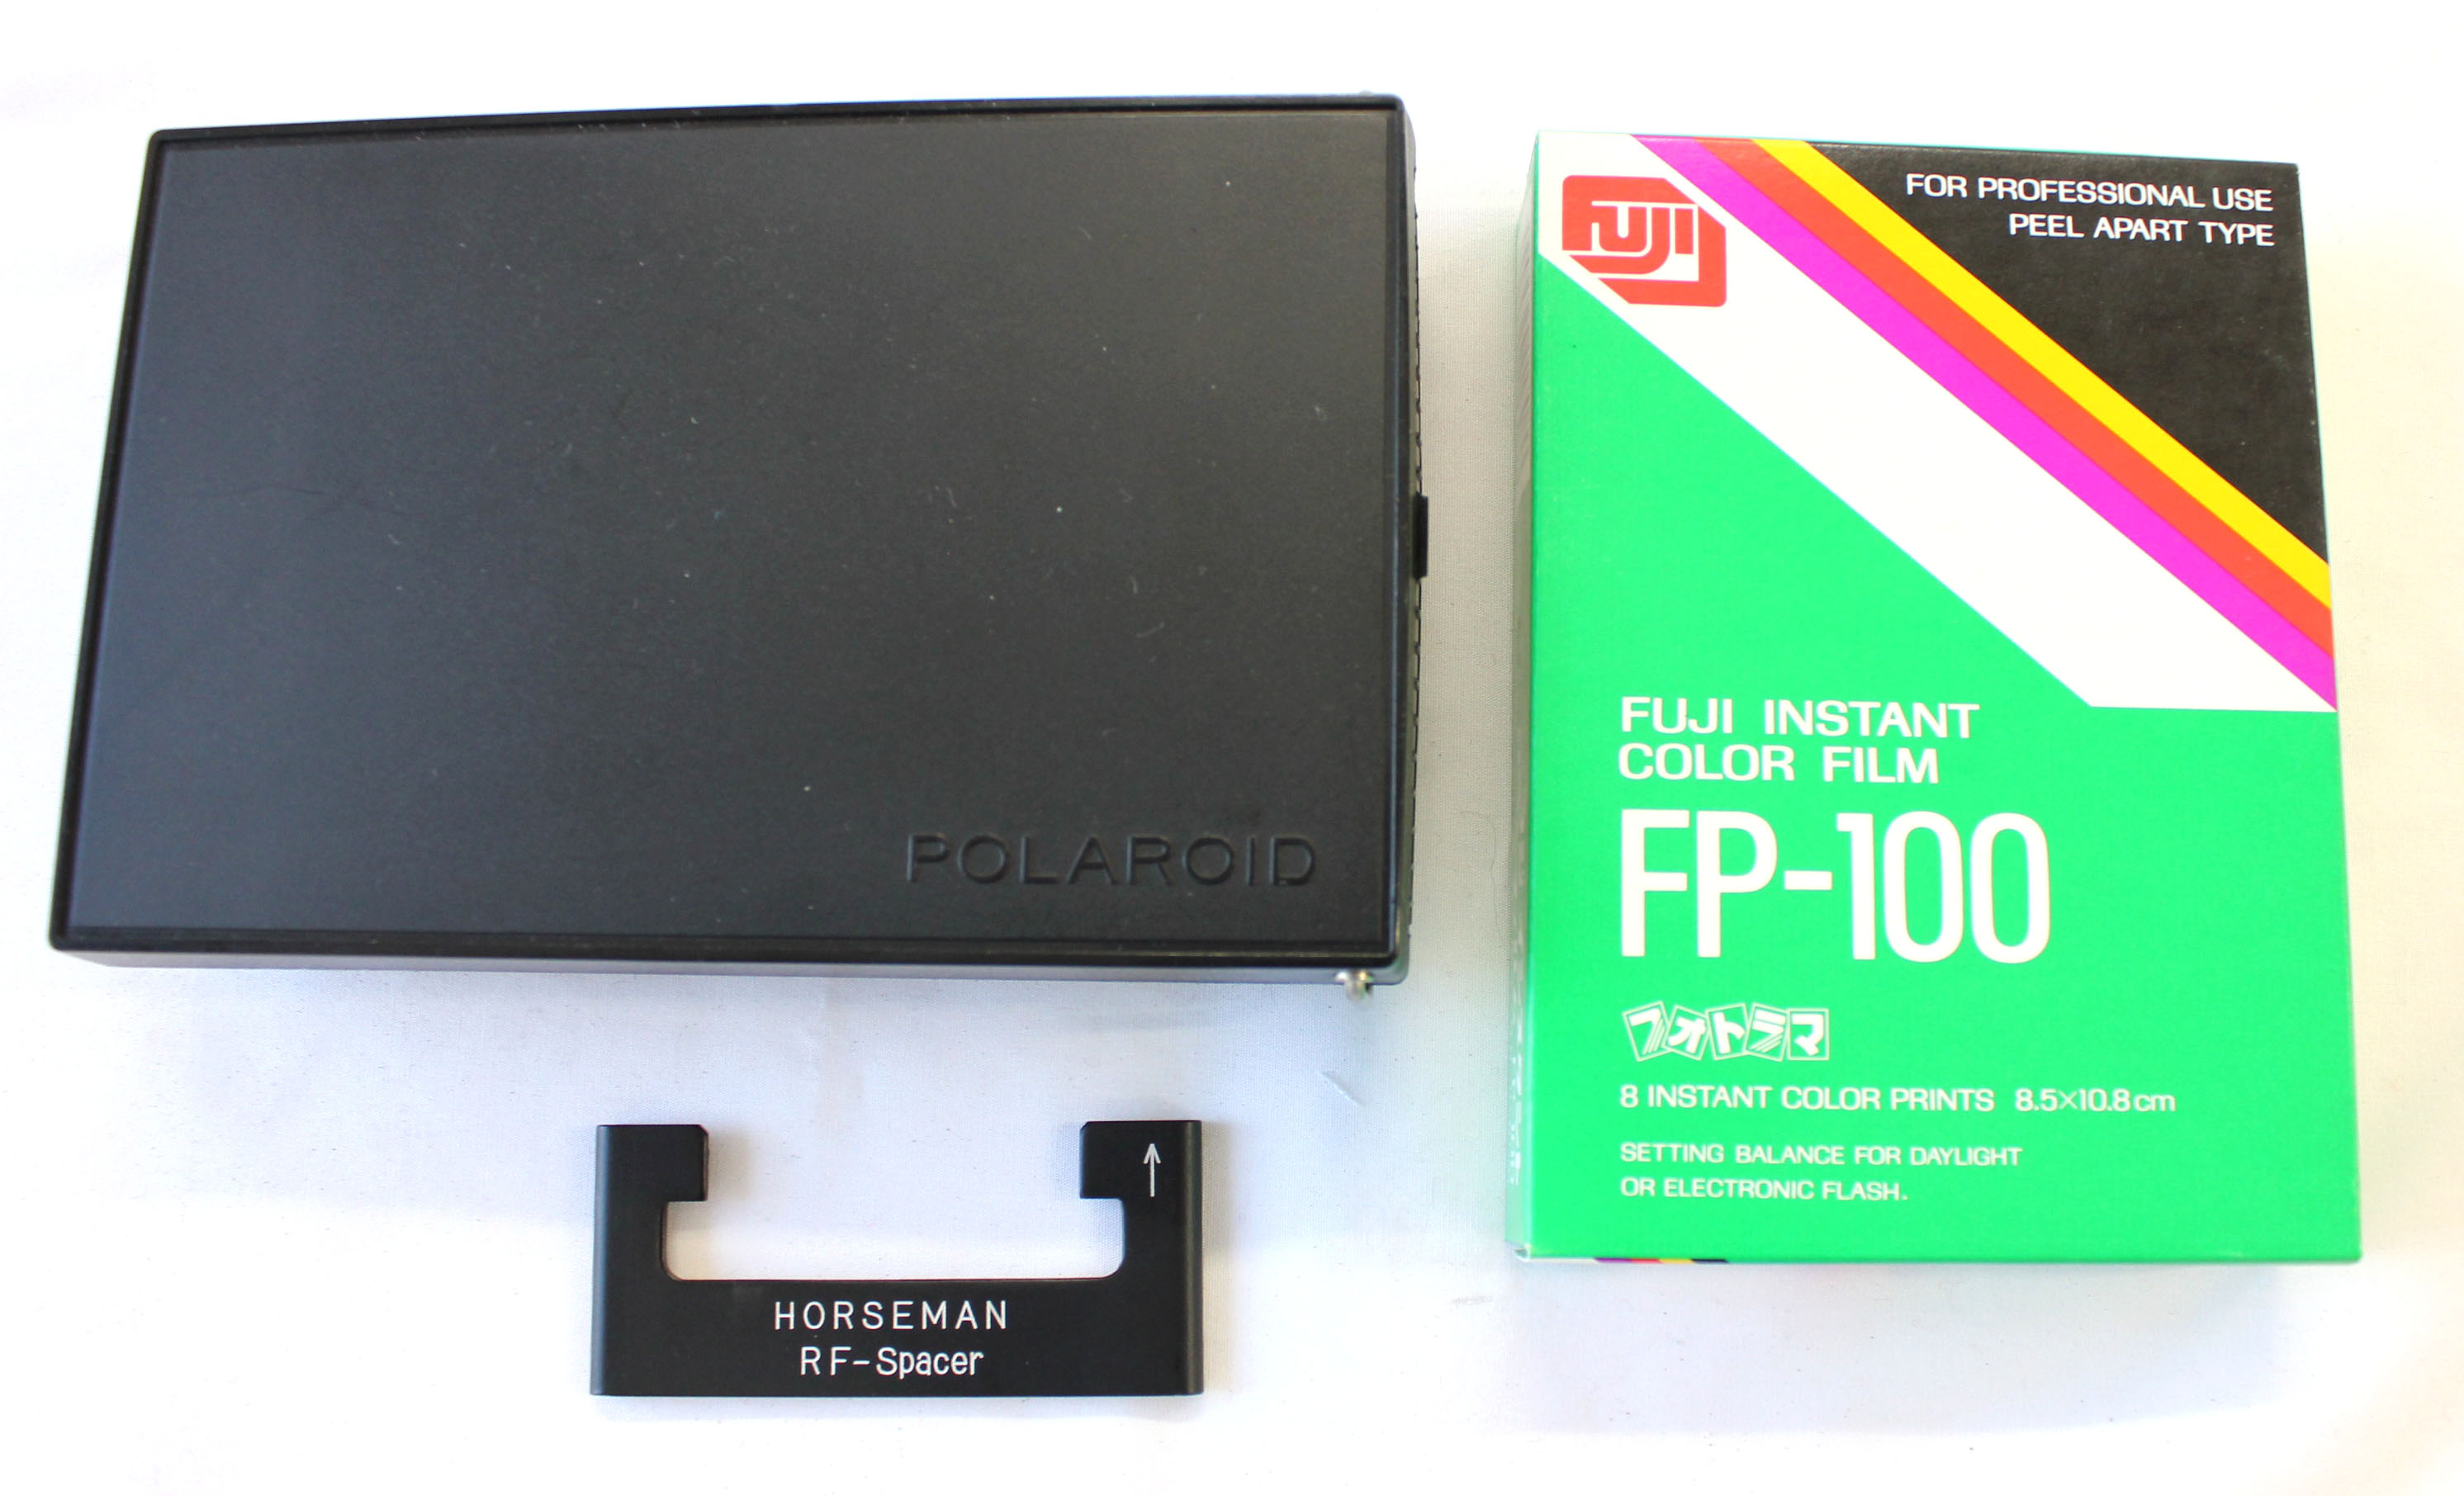 Horseman Polaroid Film Back Holder 6x9 for VH, VH-R, 980, 985 with Spacer and FP-100 film from Japan